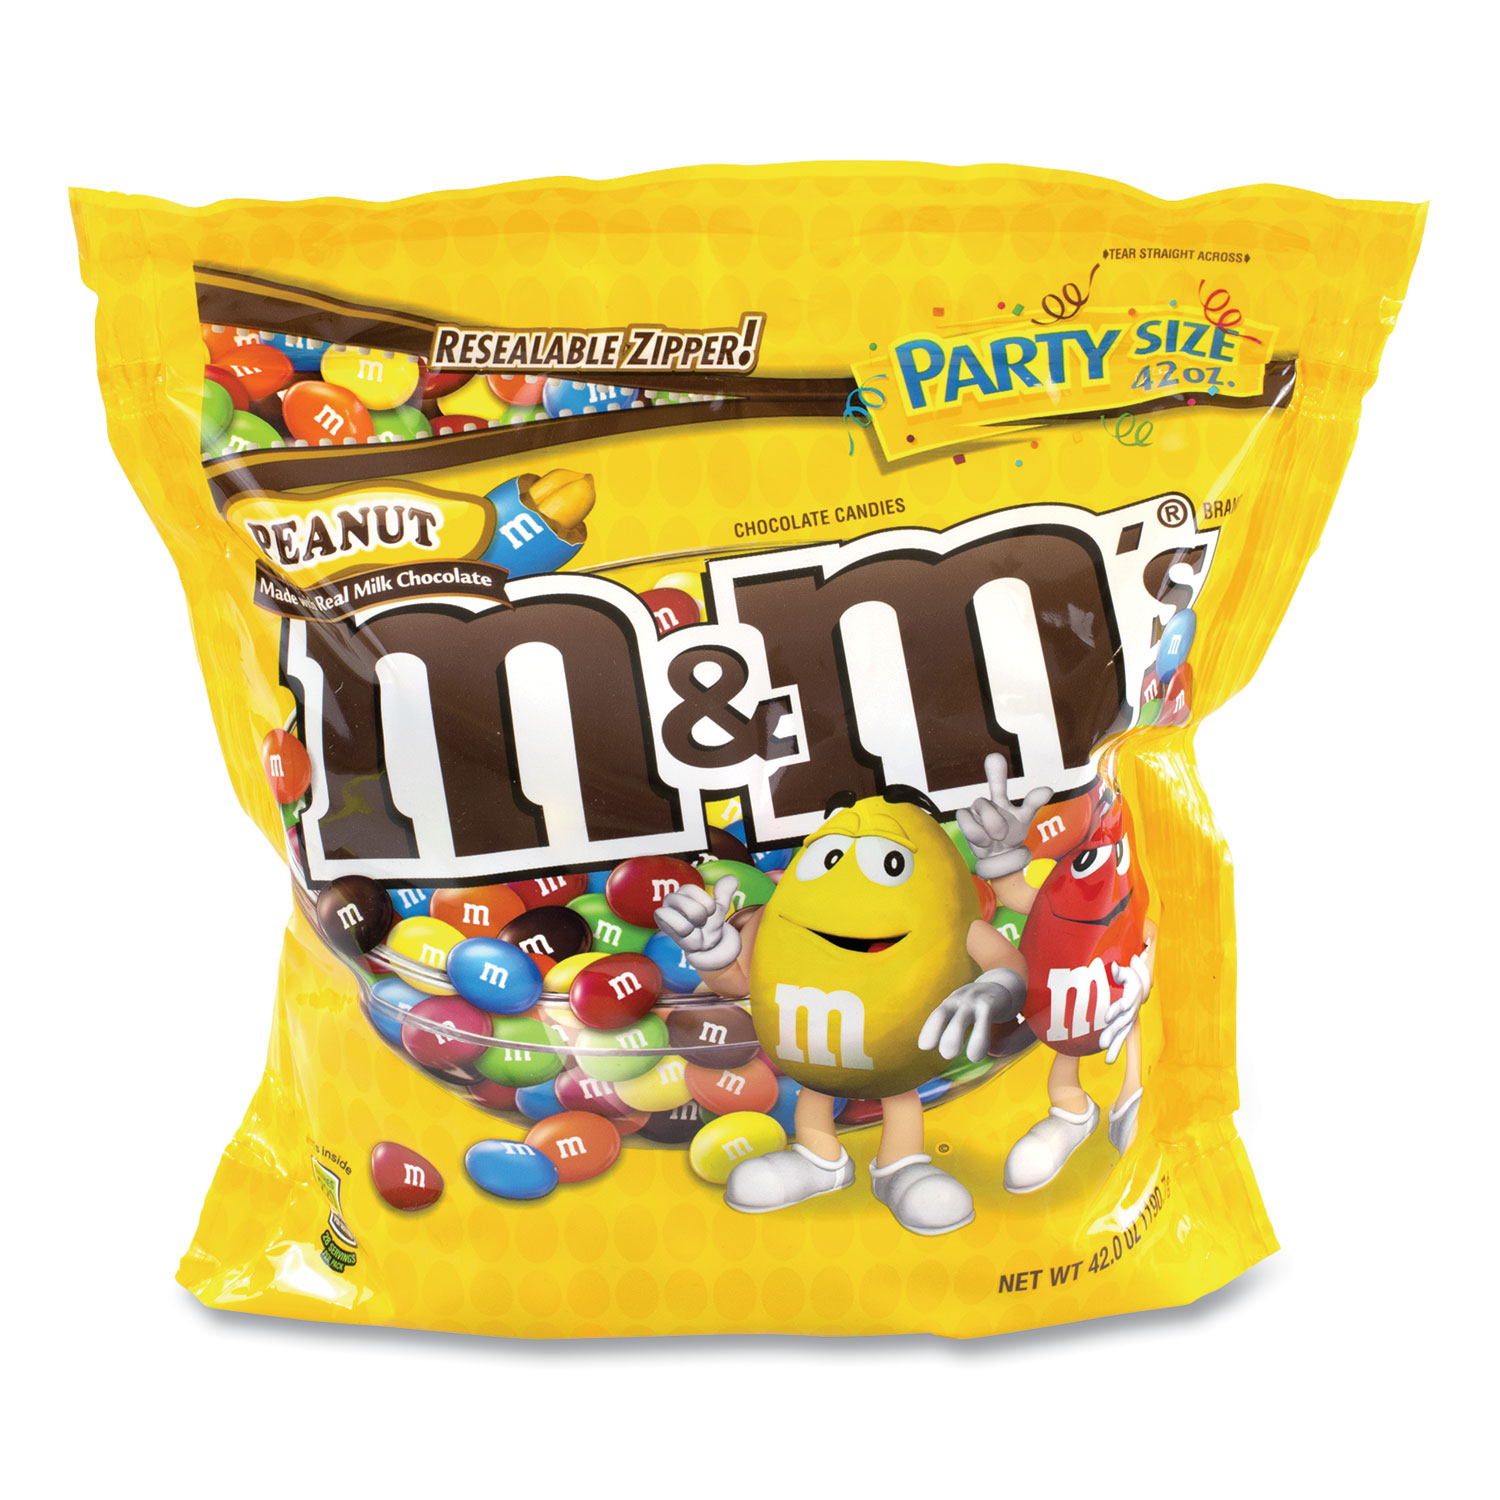  M & M's 32437 SUP Party Bag Peanut, 38 oz Bag, 2 Bags/Pack, Free Delivery in 1-4 Business Days (GRR20901304) 